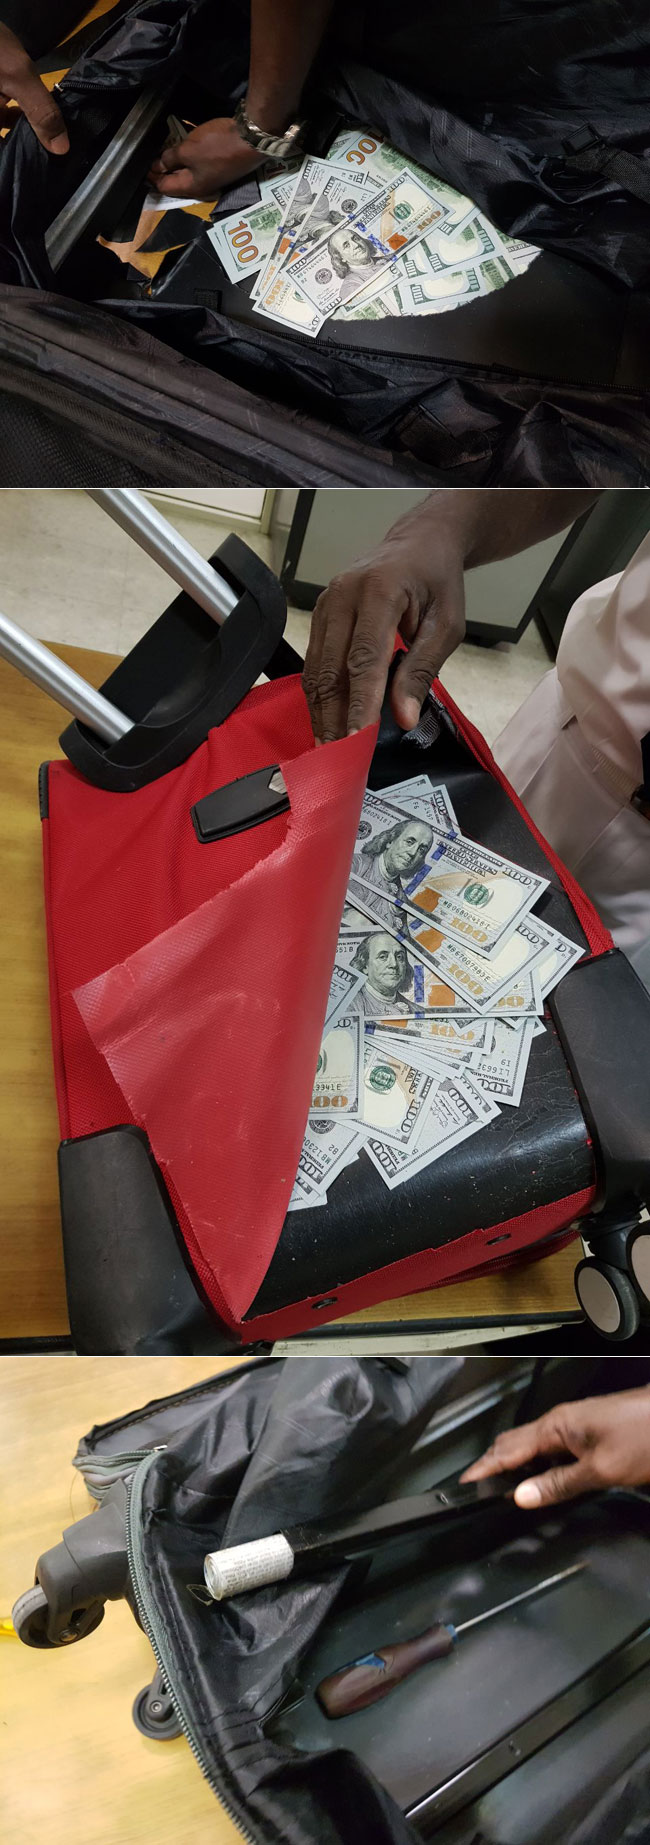 Foreign currency hidden inside luggage...